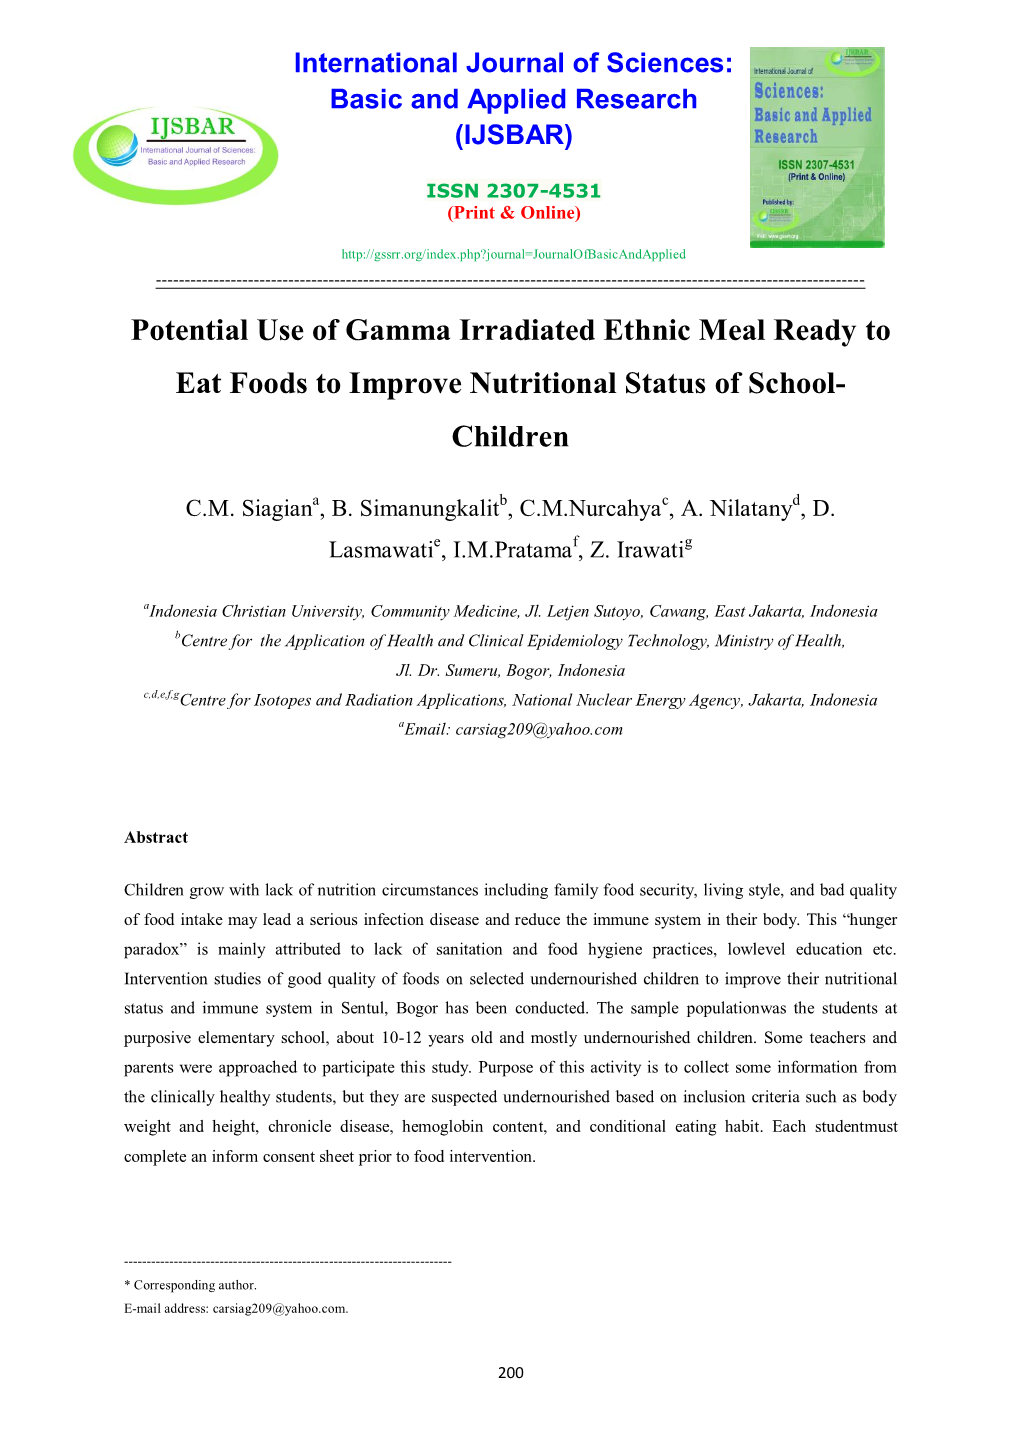 Potential Use of Gamma Irradiated Ethnic Meal Ready to Eat Foods to Improve Nutritional Status of School- Children